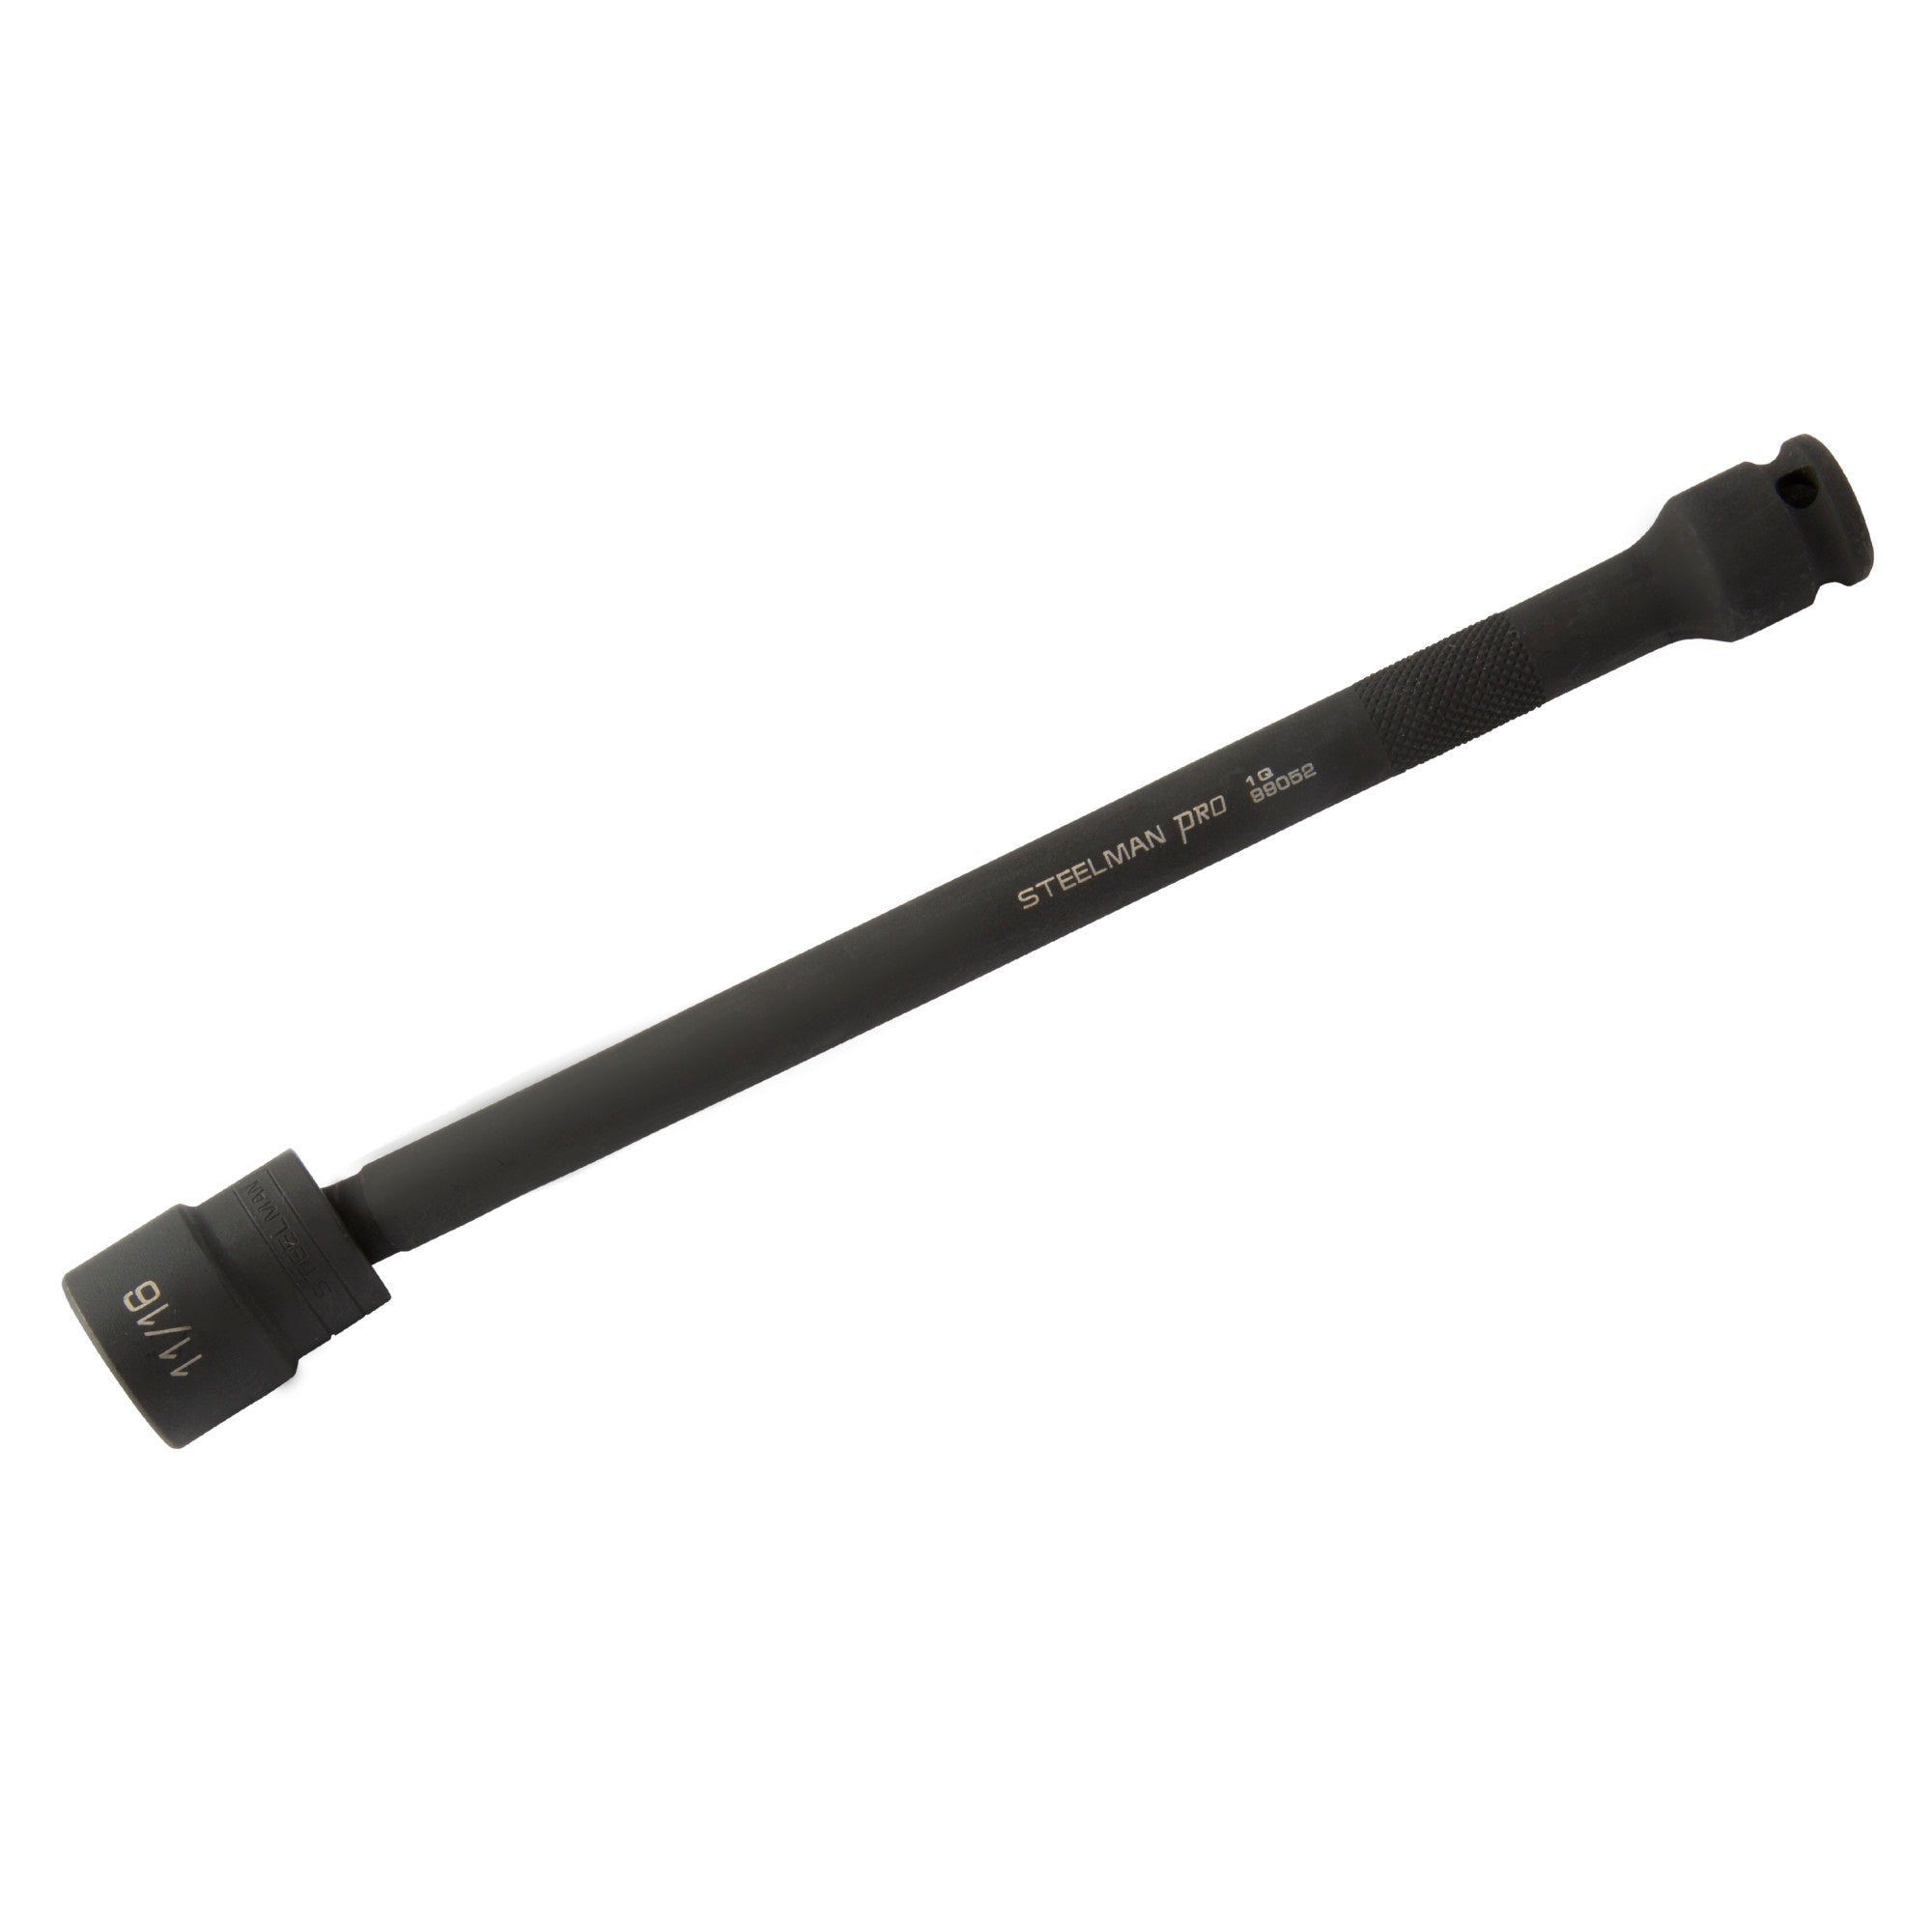 Tite-reach 3/8 inch Professional Extension Wrench